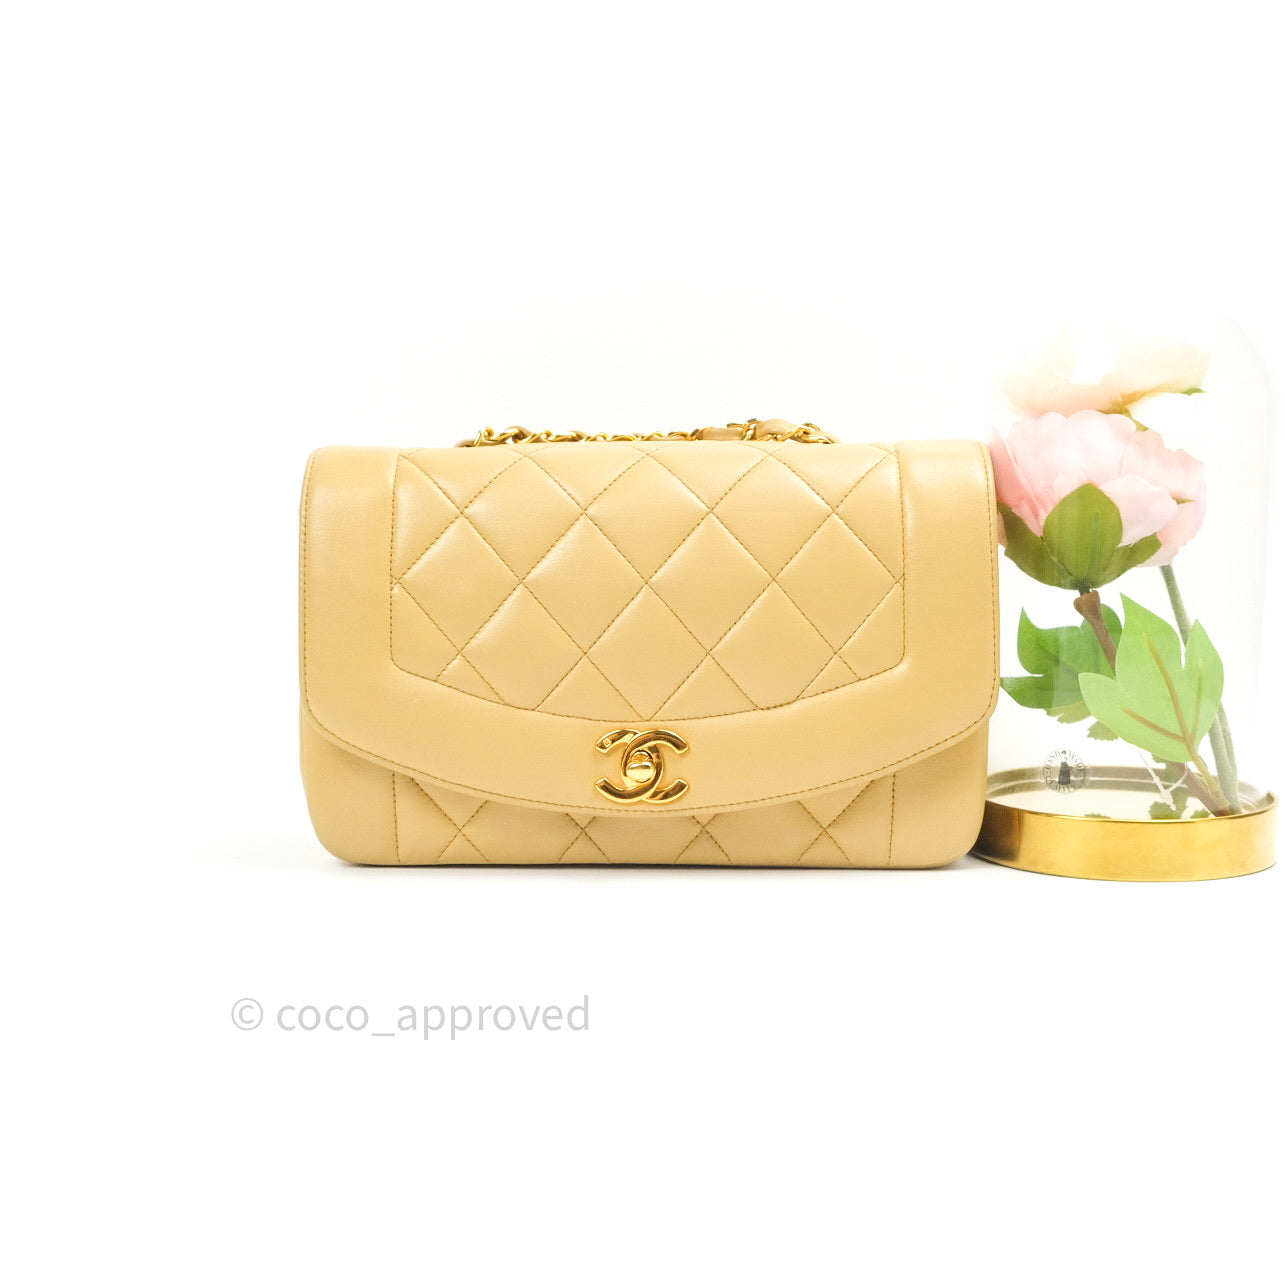 Chanel Quilted Lambskin Beige Small Vintage Classic Diana Flap Bag